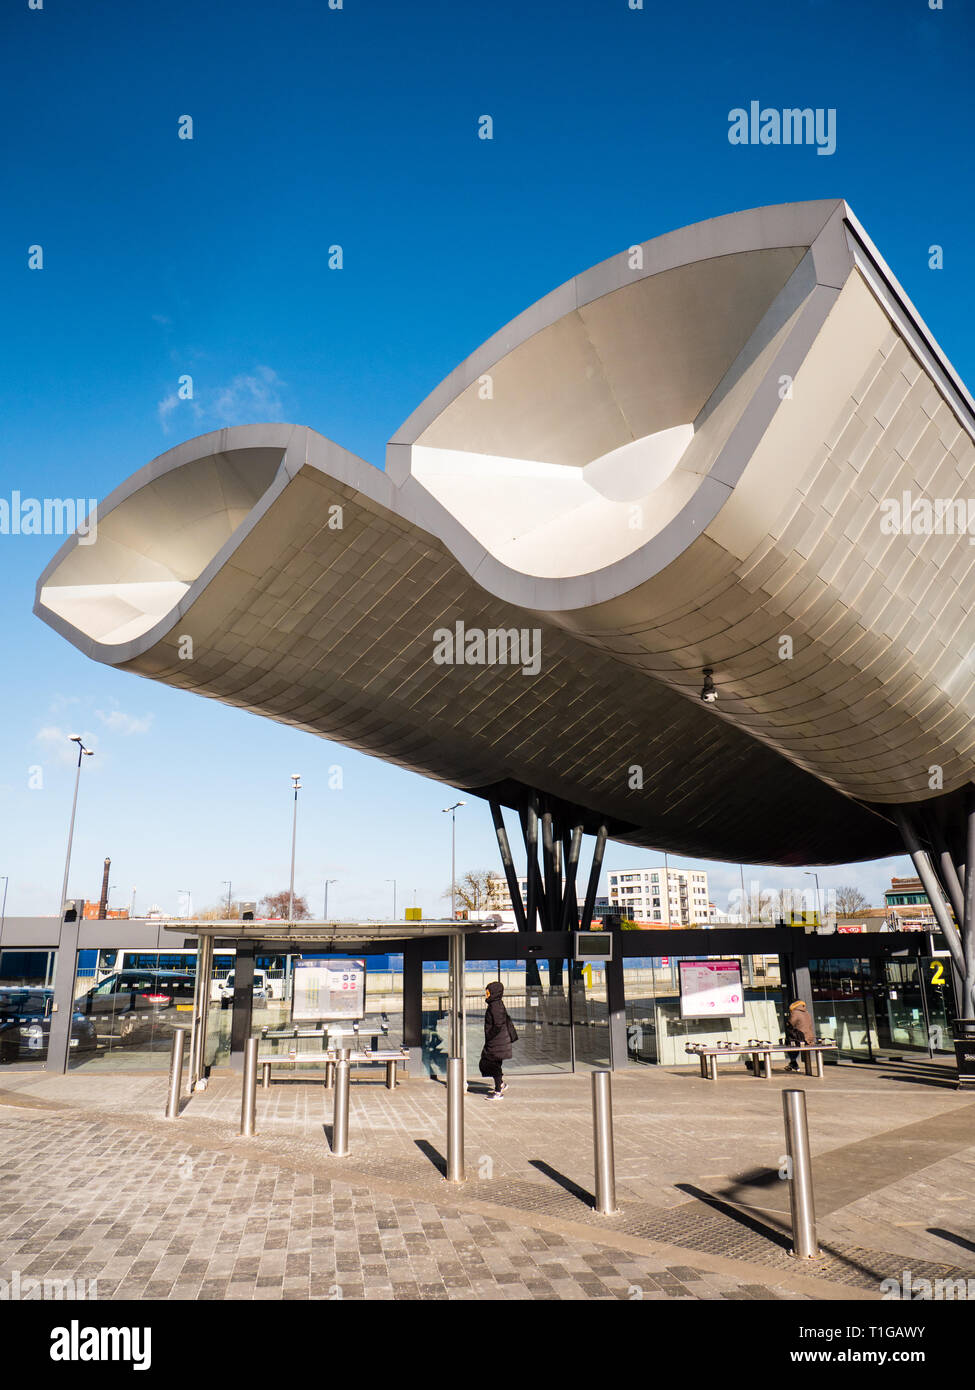 Slough Bus Station, The Heart of Slough Project to Regenerate Slough, Berkshire, England, UK, GB. Stock Photo